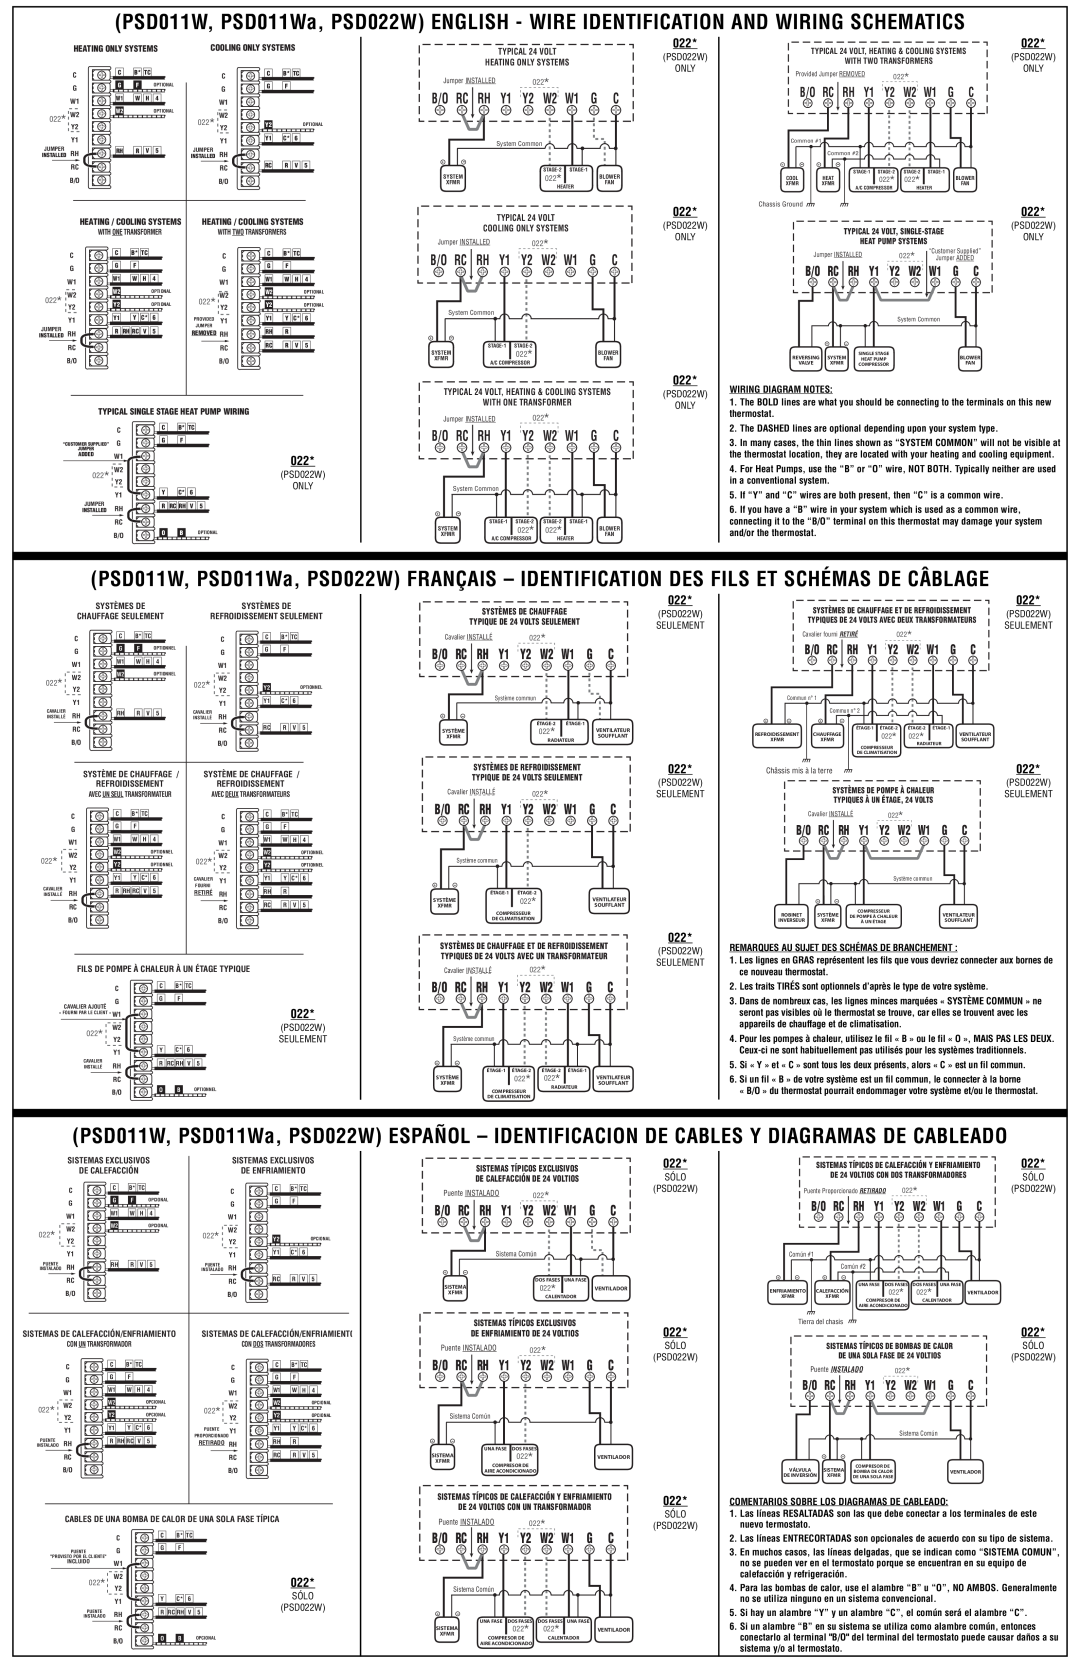 Lux Products PSD022W, PSD011WA instruction sheet Wiring Diagram Notes 